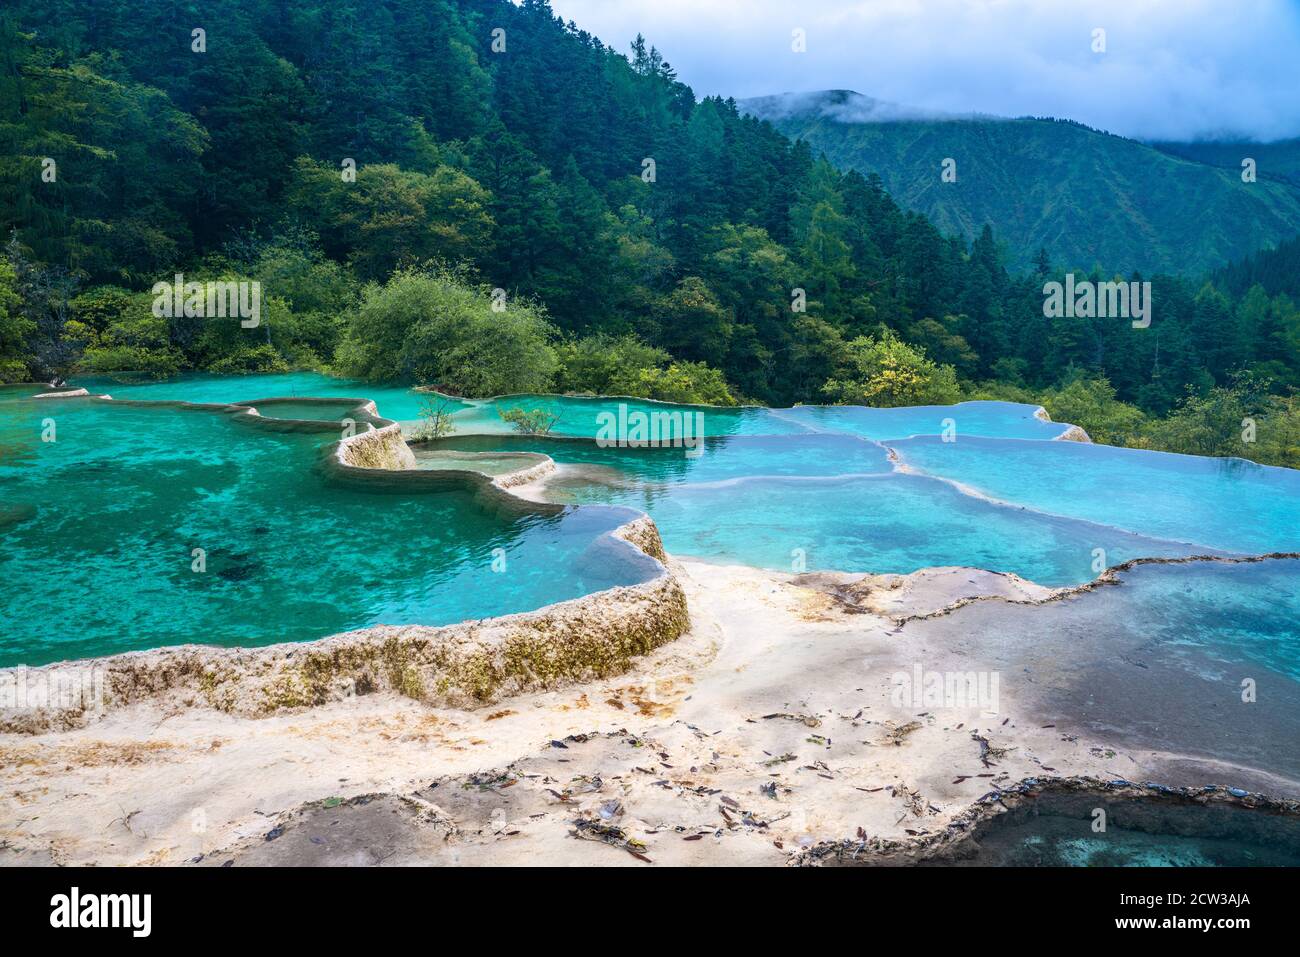 The turquoise color pools in Huanglong Valley, in Sichuan province, China. Stock Photo